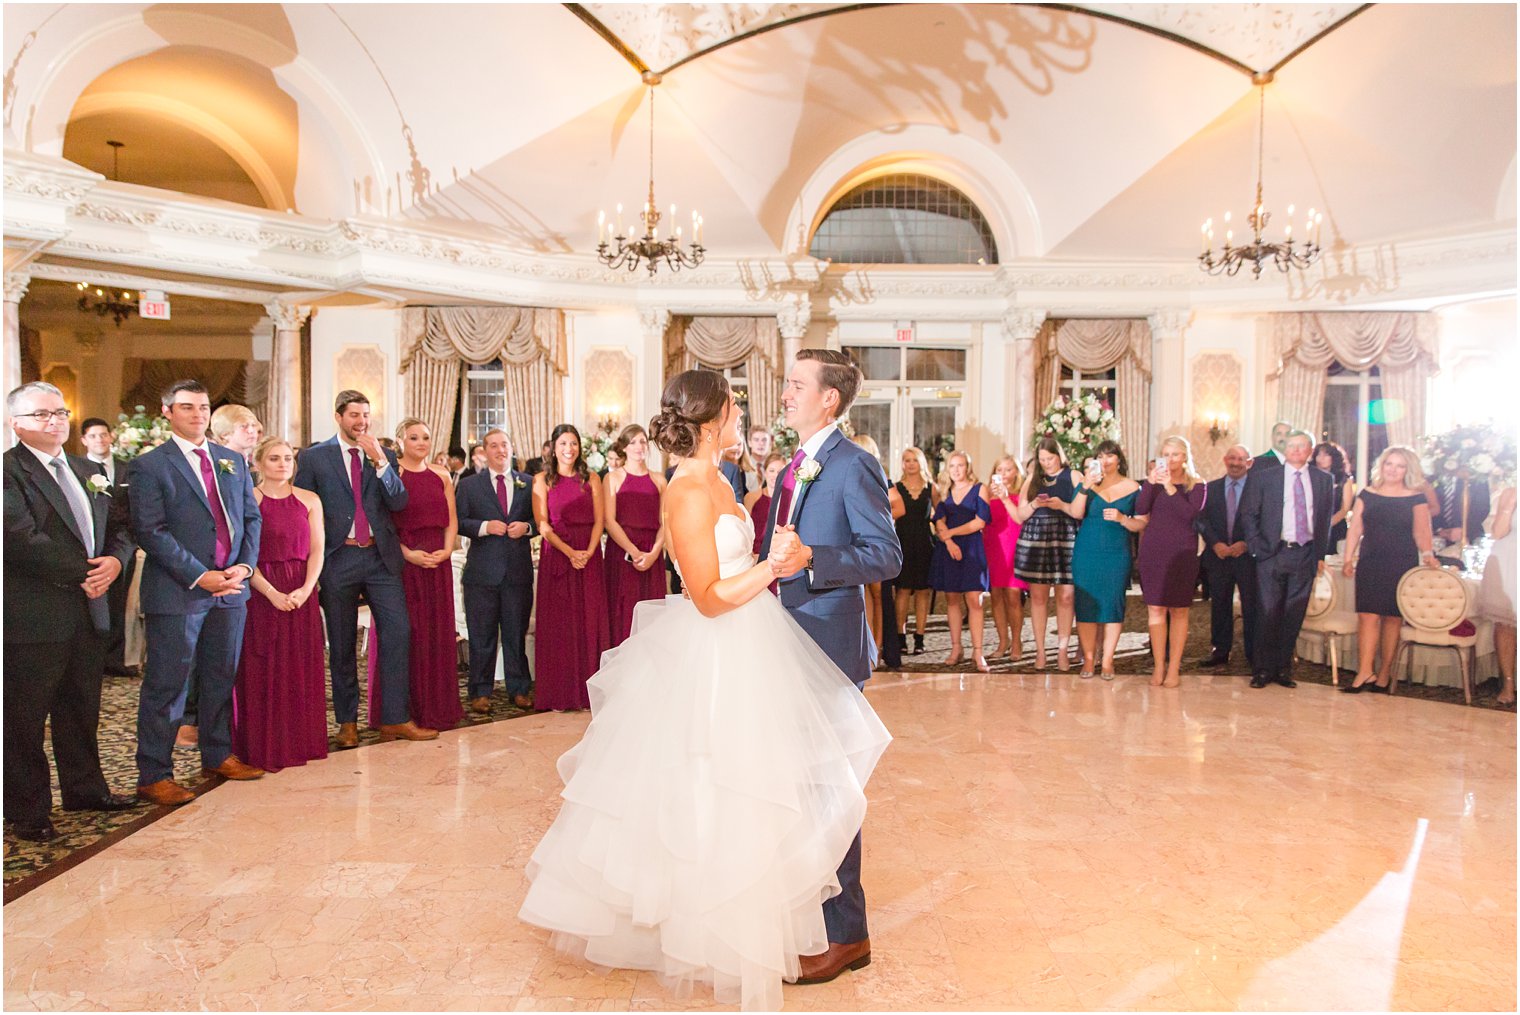 Bride and groom's first dance photo at Pleasantdale Chateau